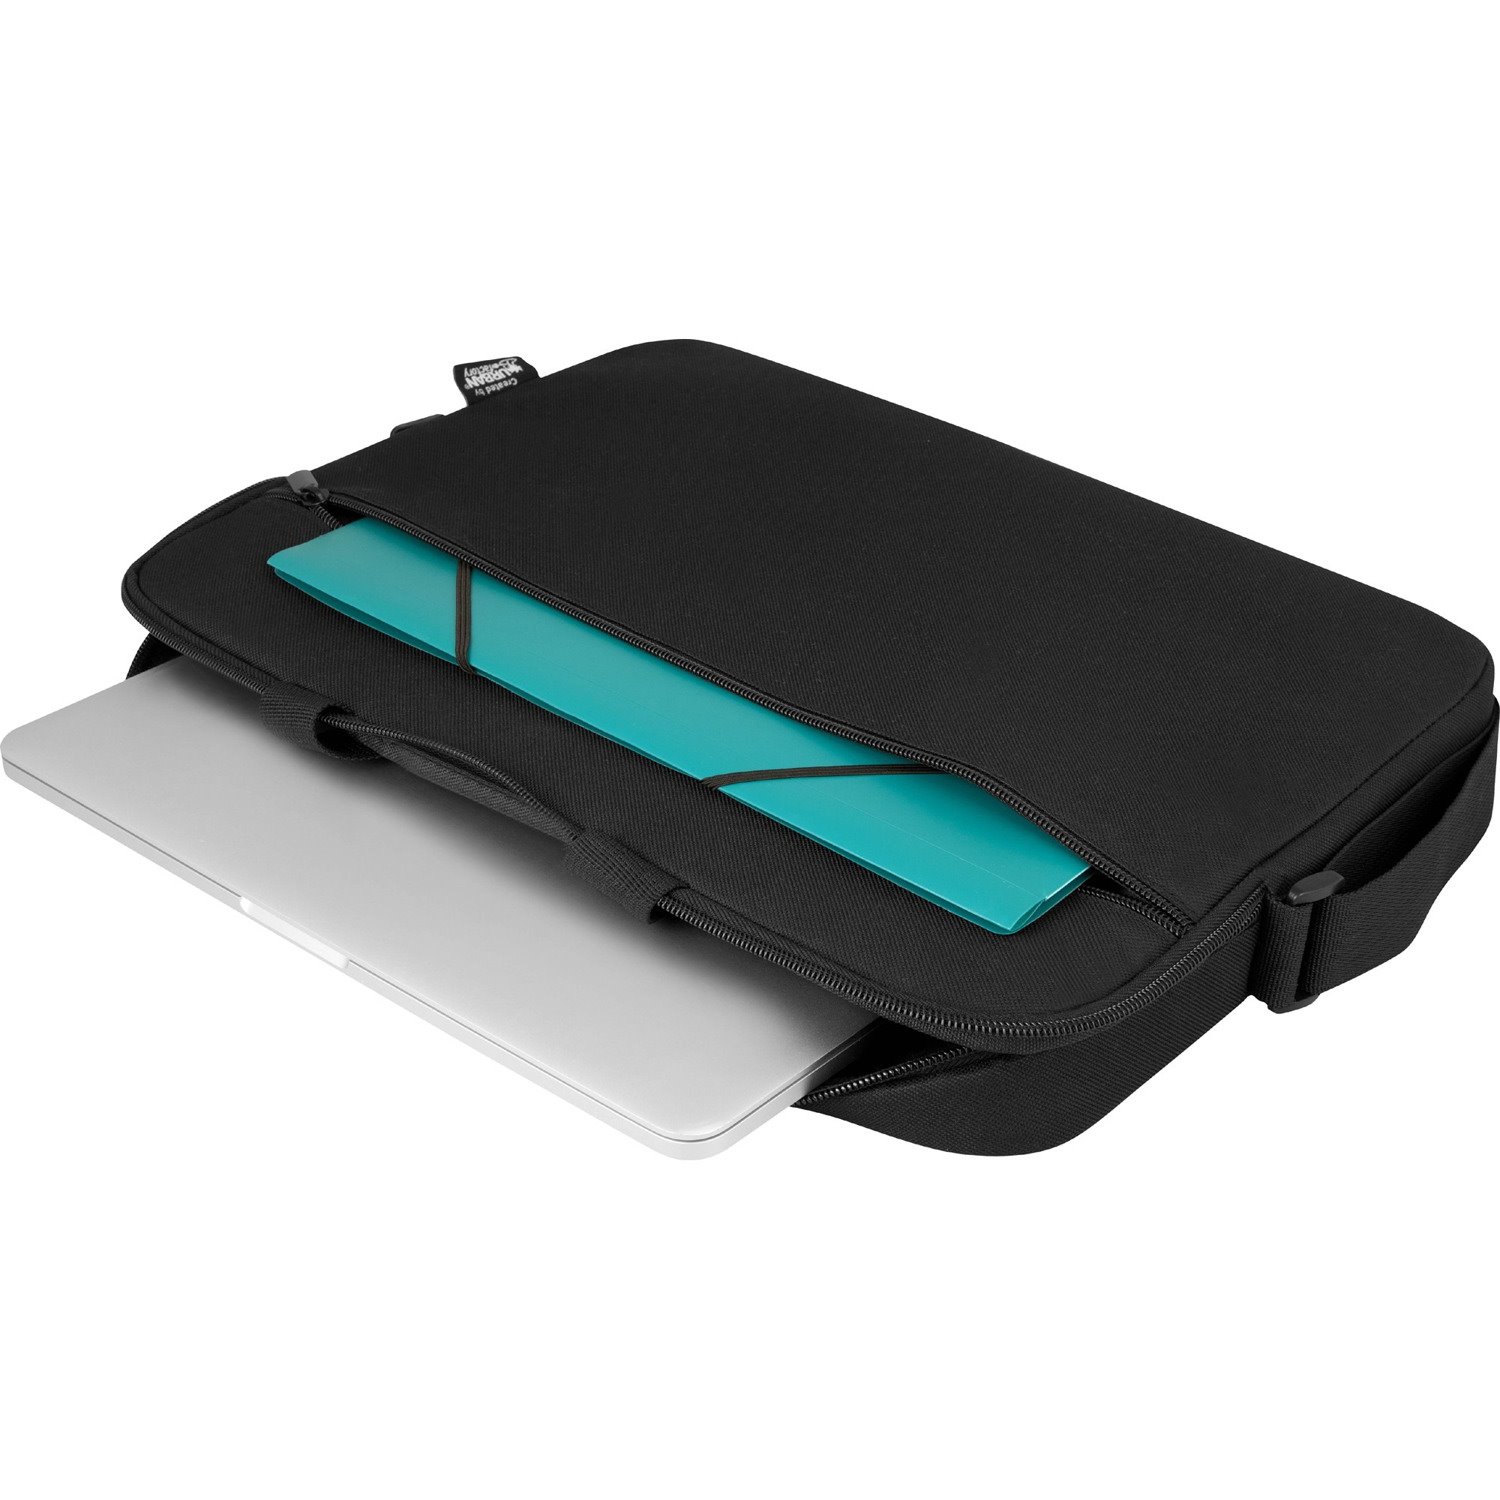 Urban Factory Nylee TLS15UF Carrying Case for 39.6 cm (15.6") Notebook - Black